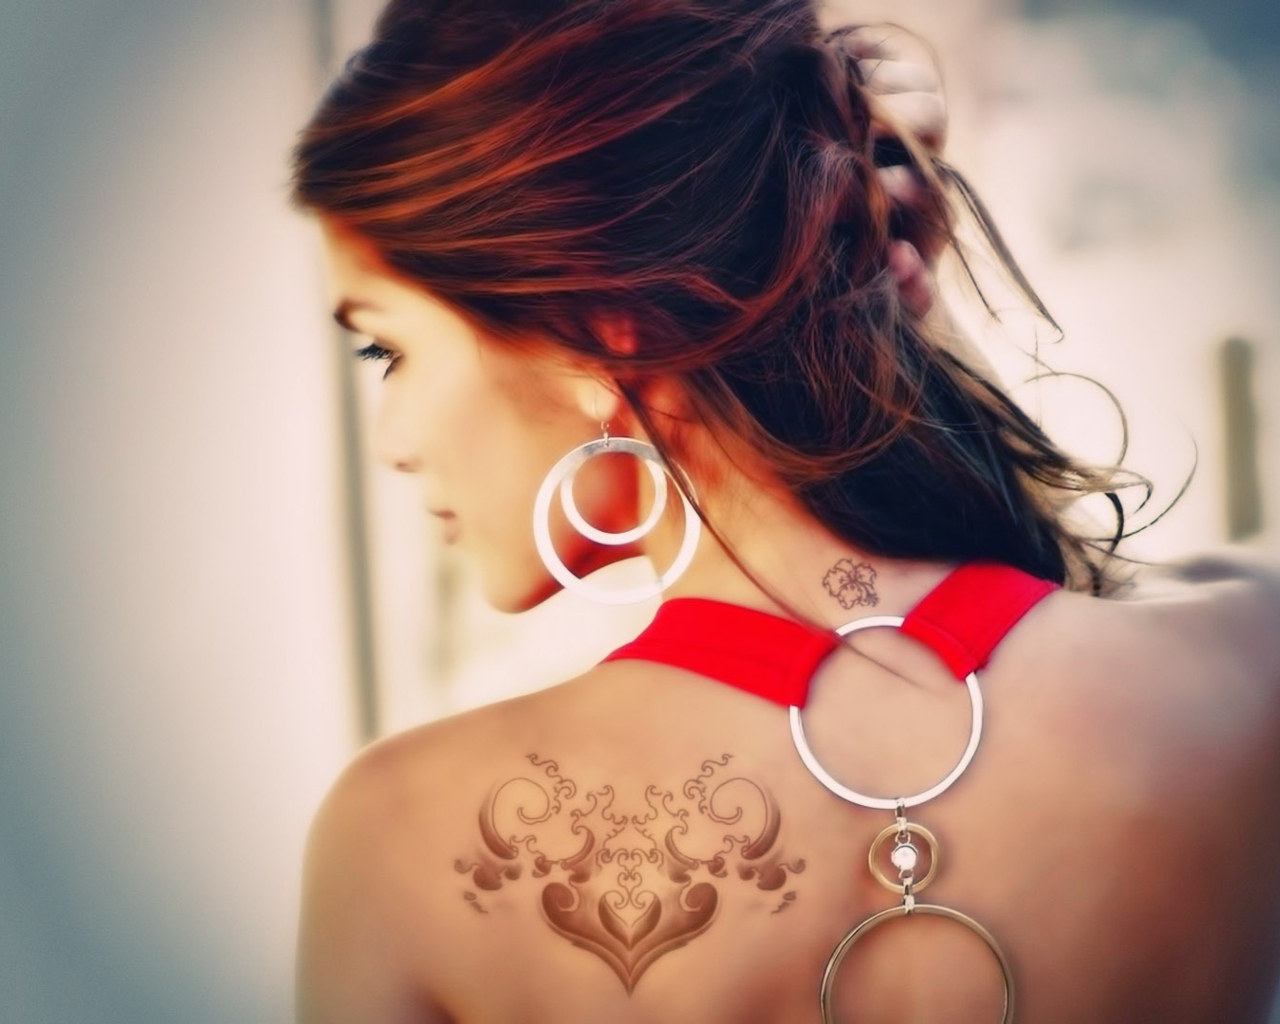 Girl With Tattoo On Her Back wallpaper 1280x1024